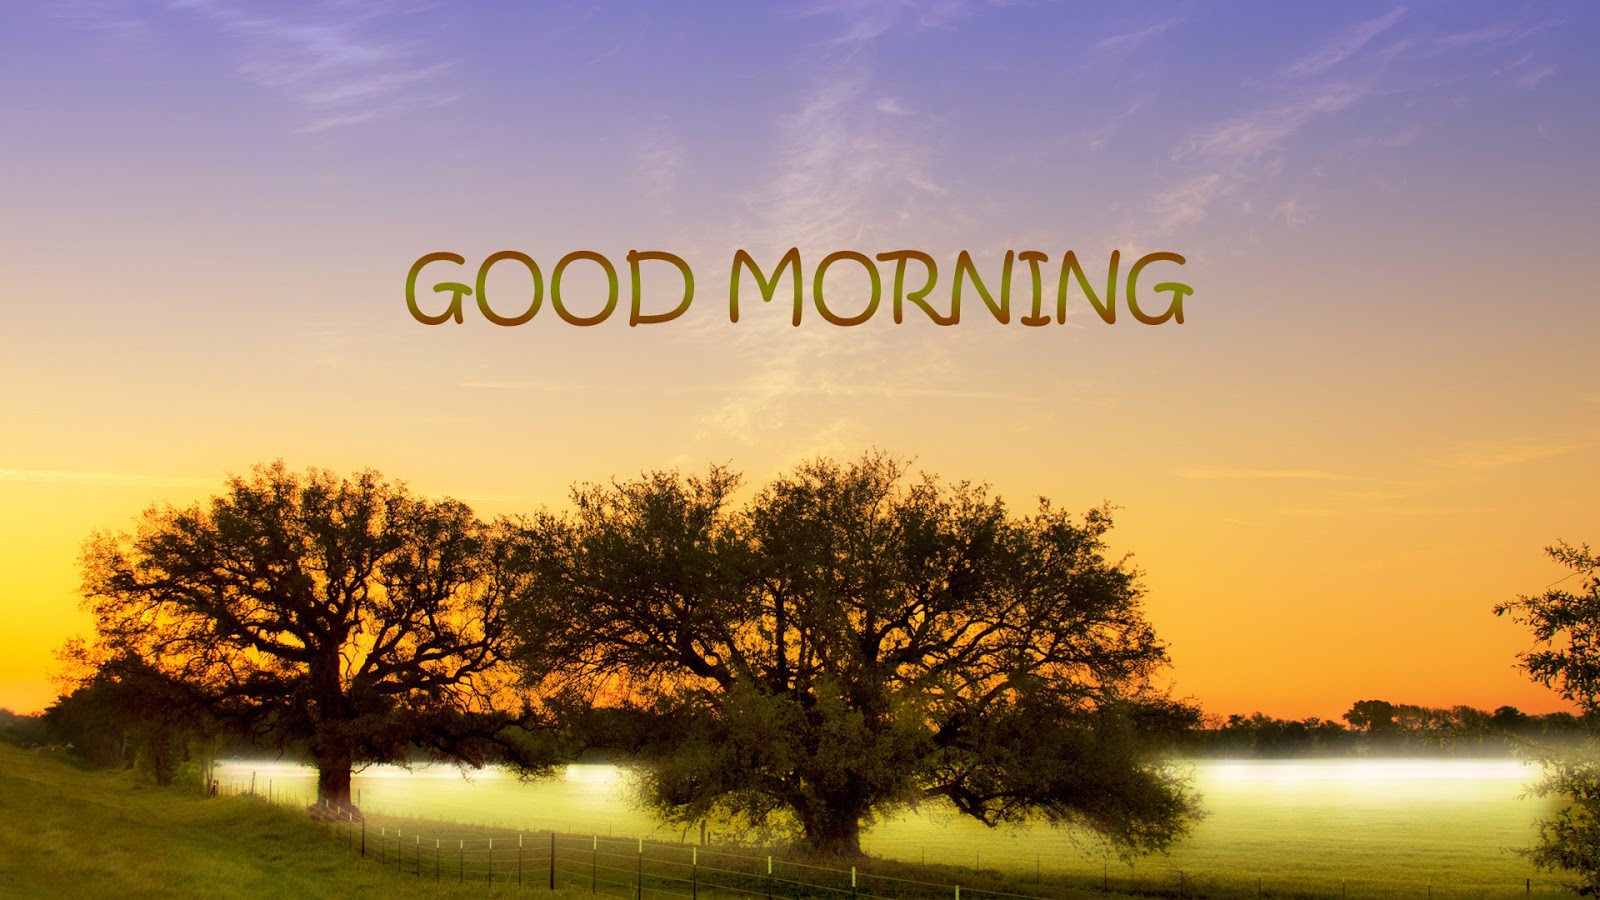 Good morning lettering with tree background